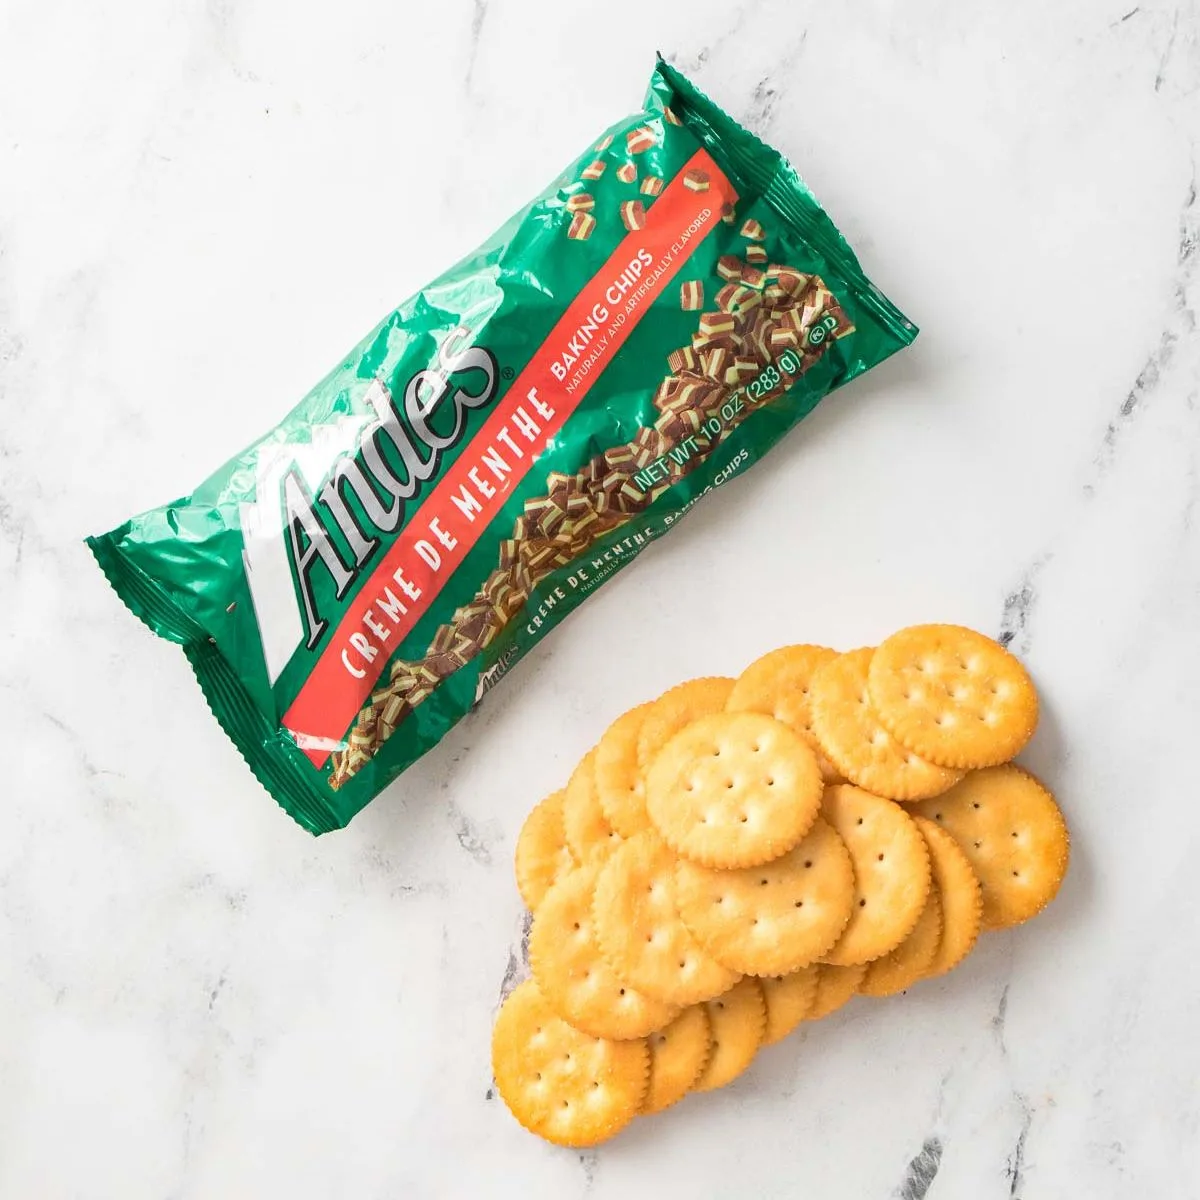 Ingredients to make Ritz thin mints cookies